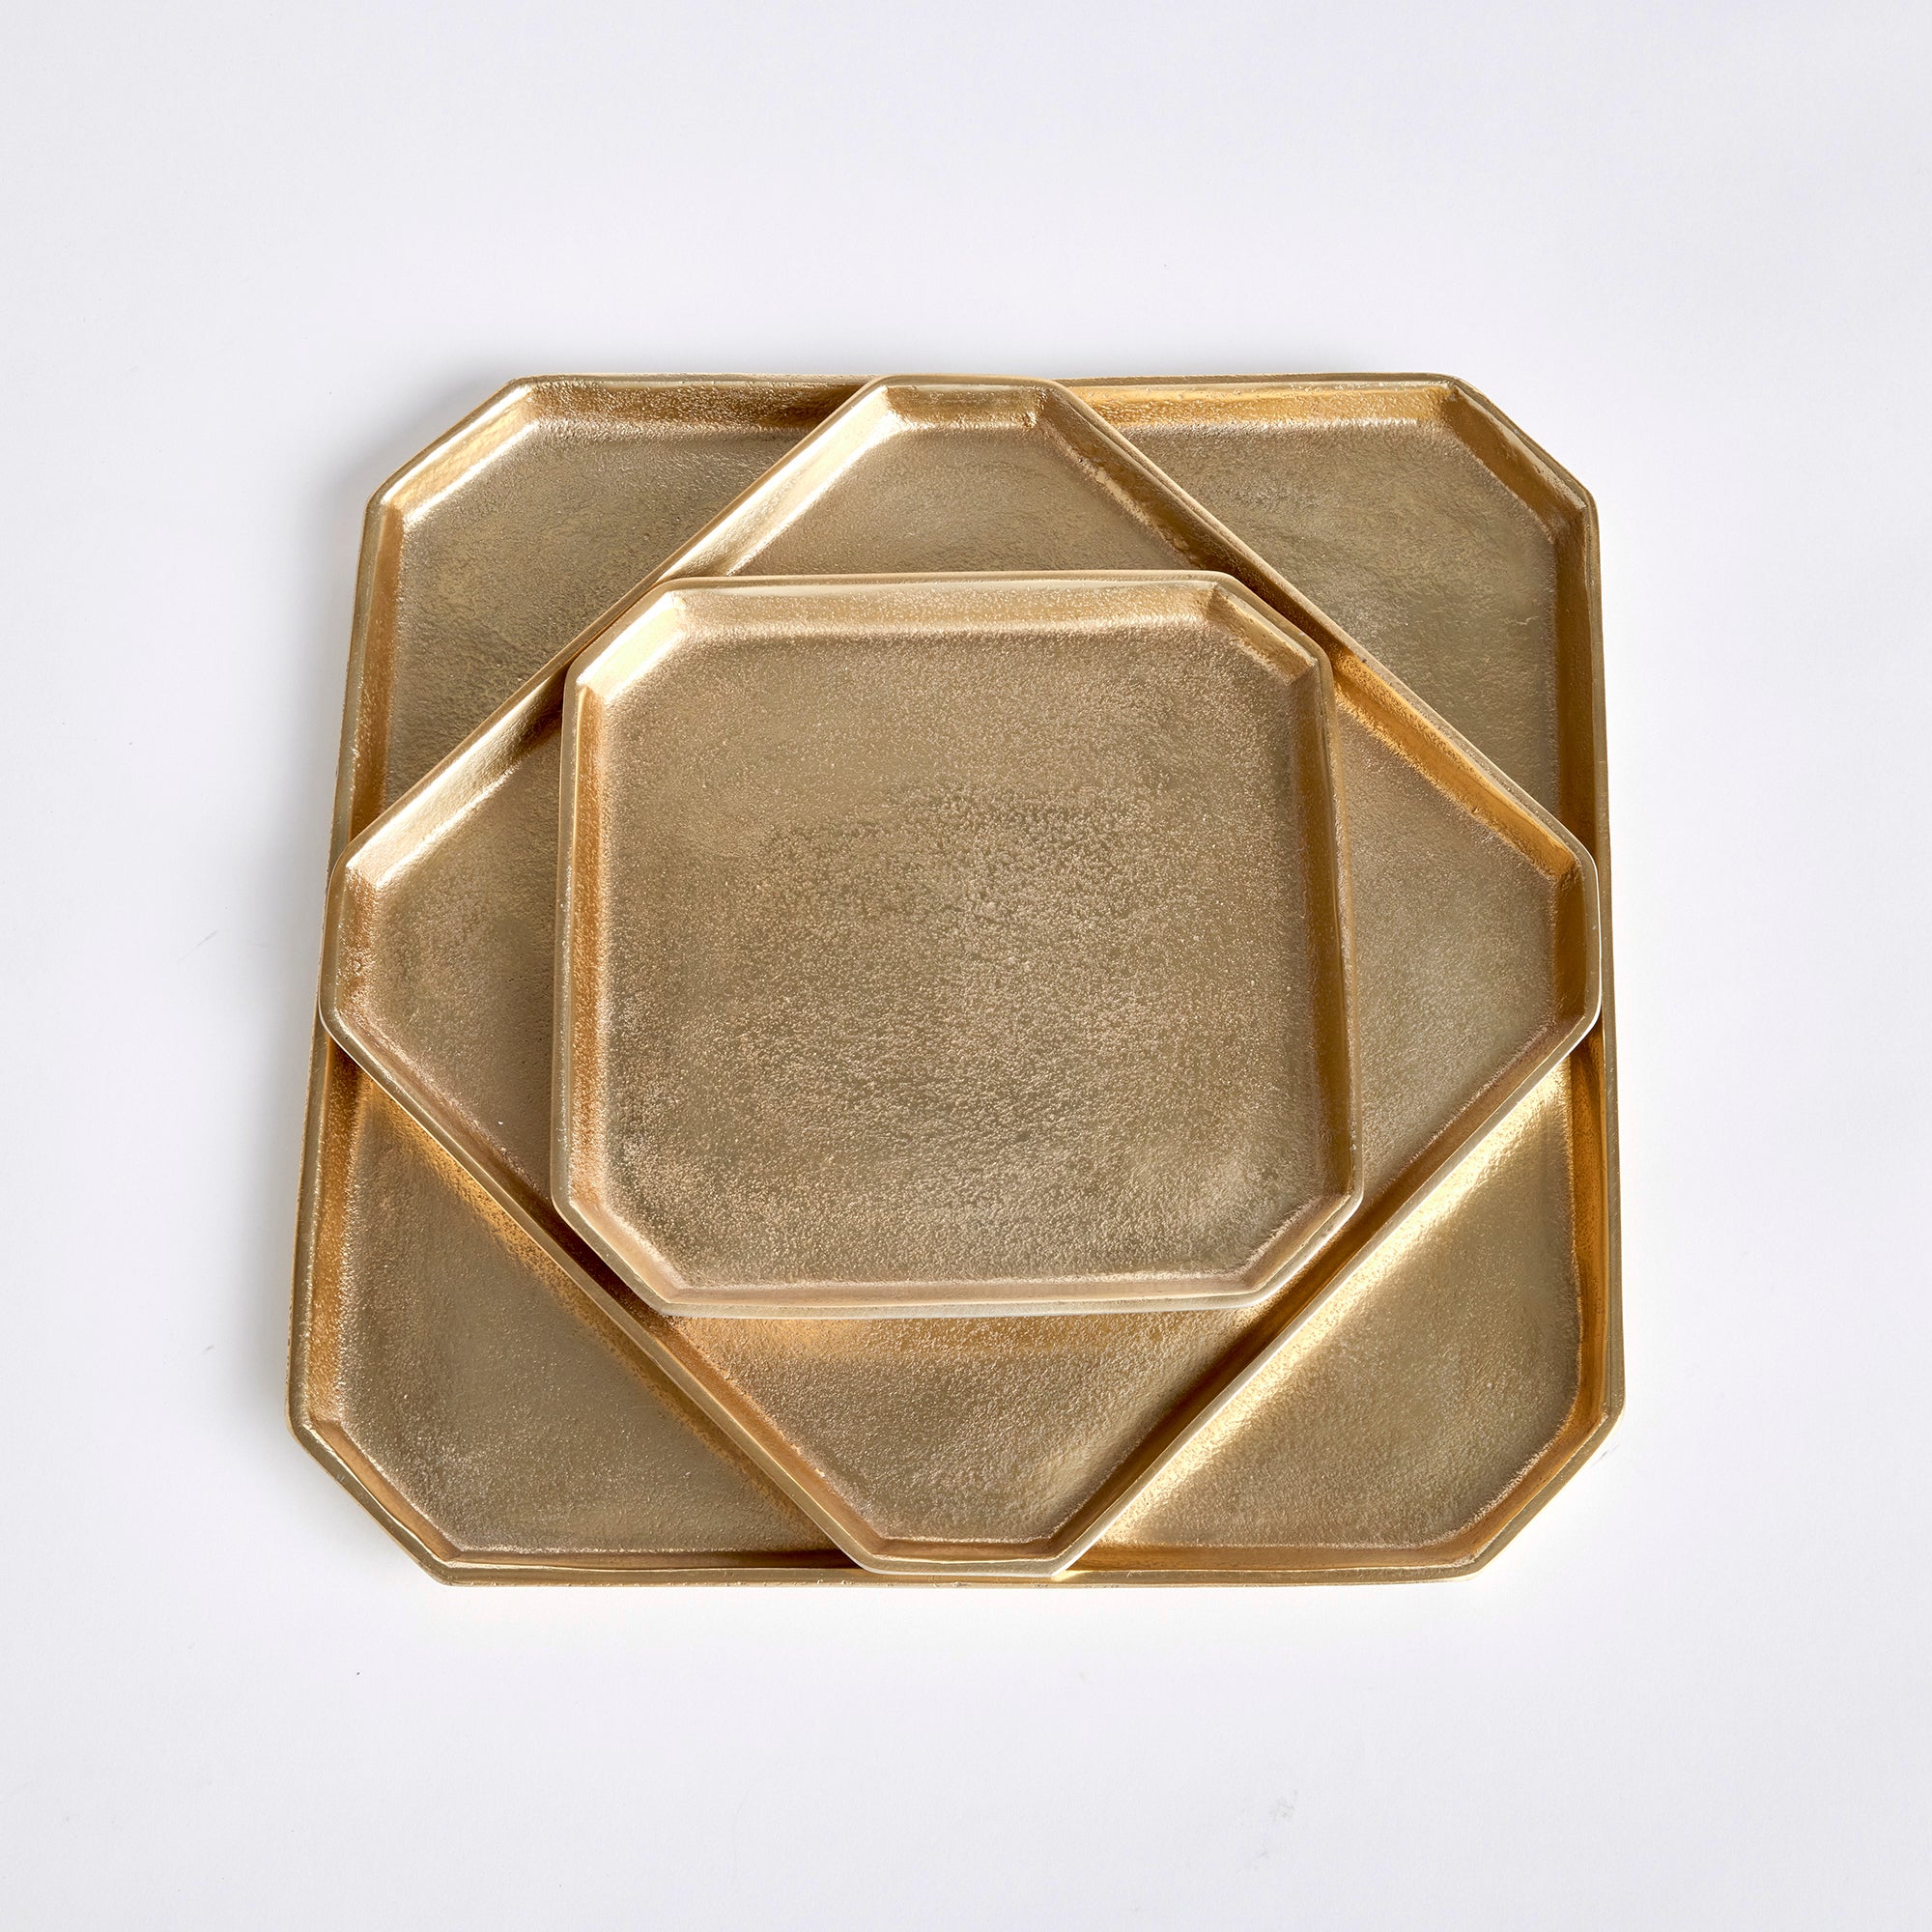 A geometric shape and sleek look make these cast aluminum trays unique. Line with a collection of candles for a golden, contemporary touch. They are dry food safe, so serve your favorite muffins or rolls in style at your next gathering. Amethyst Home provides interior design, new construction, custom furniture, and area rugs in the Monterey metro area.